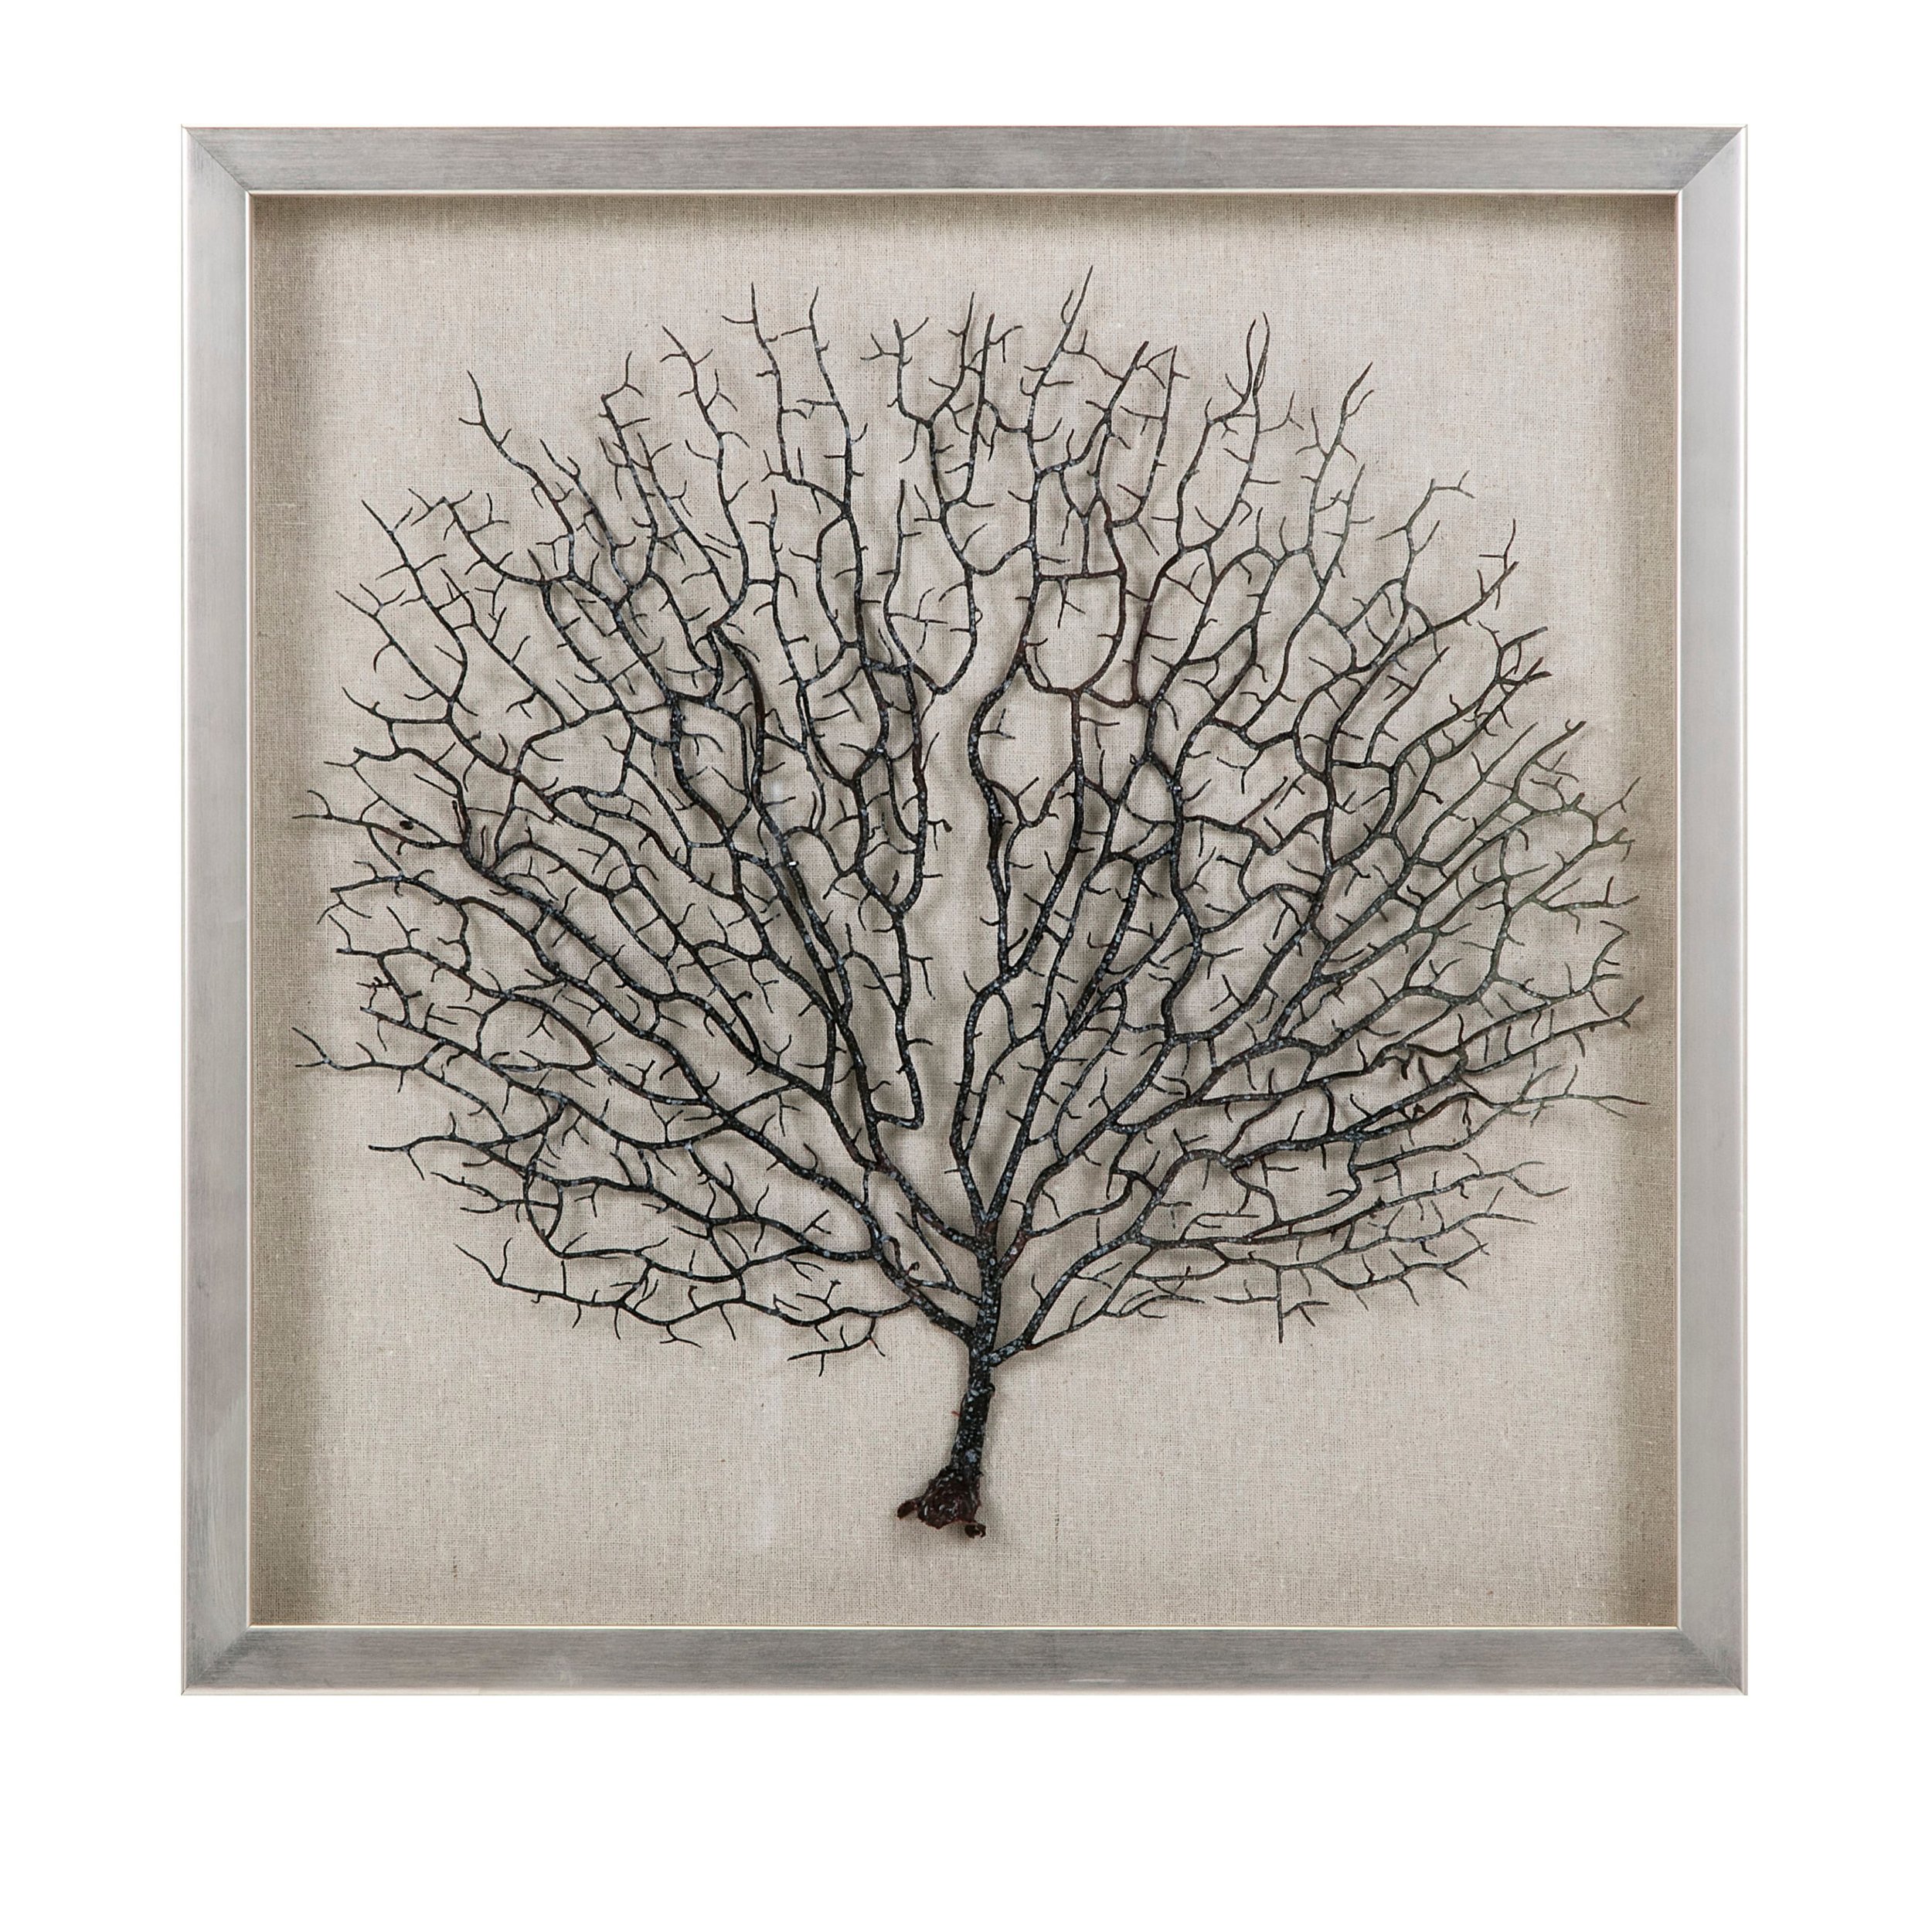 Bodaway-coral-in-shadowbox-with-frame-19.75-chnes-long-x-19.75英寸-igh-x-1.5英寸范围-2d1fe3a8-9116-4c6b-8c65-4b528f54583c.jpg